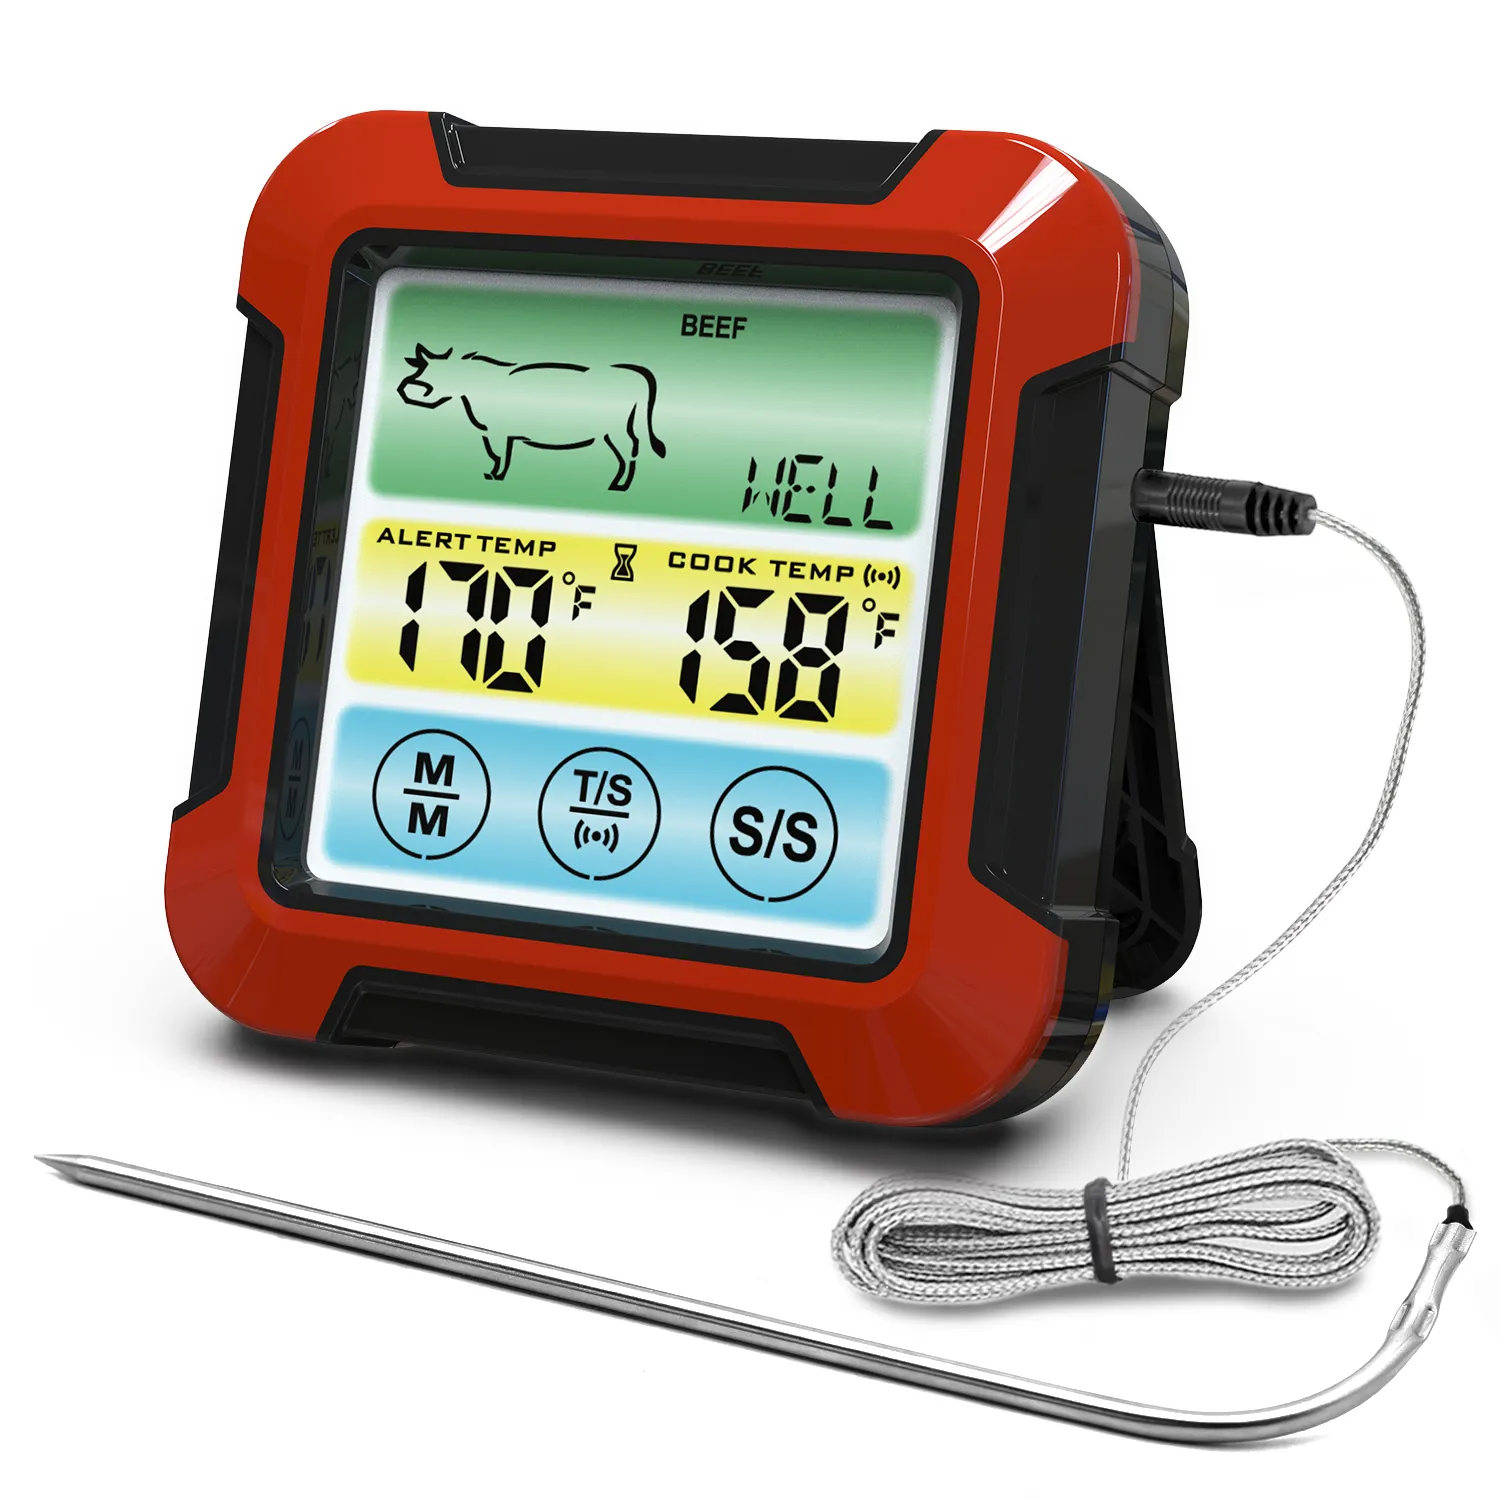 2022 New Digital Instant Read Meat and Candy Thermometers Meat Thermometer with Touchscreen For Kitchen Grill BBQ Food Cooking